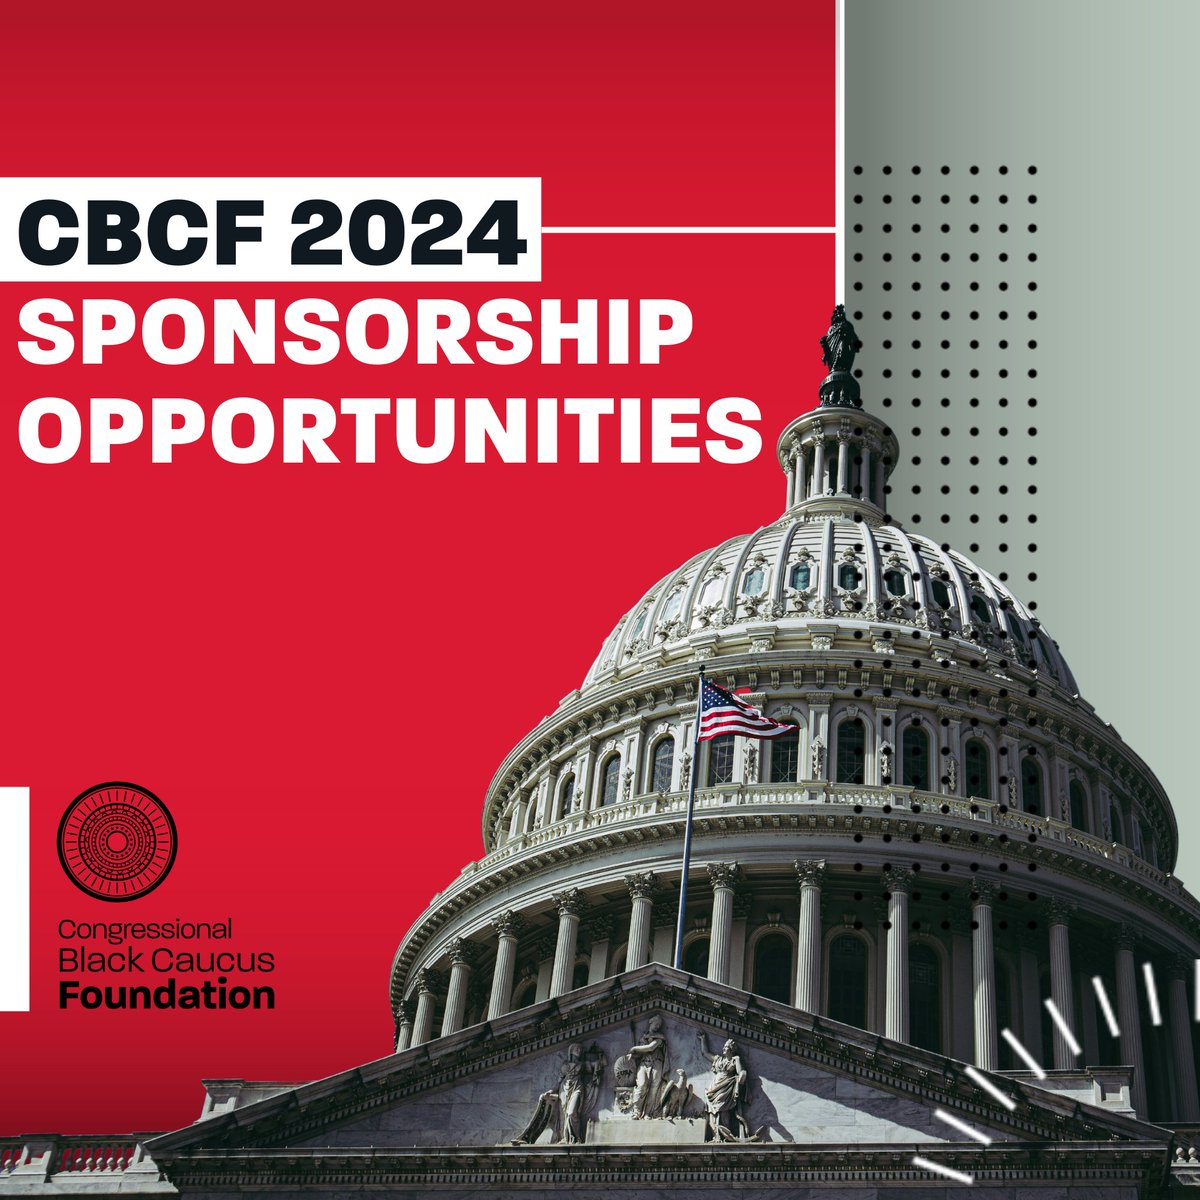 Are you passionate about supporting initiatives that uplift the Black community? Become a #CBCF sponsor! Contribute to meaningful change with us & gain visibility and recognition for your organization. Learn more: bit.ly/43ZeFB9 #opportunity